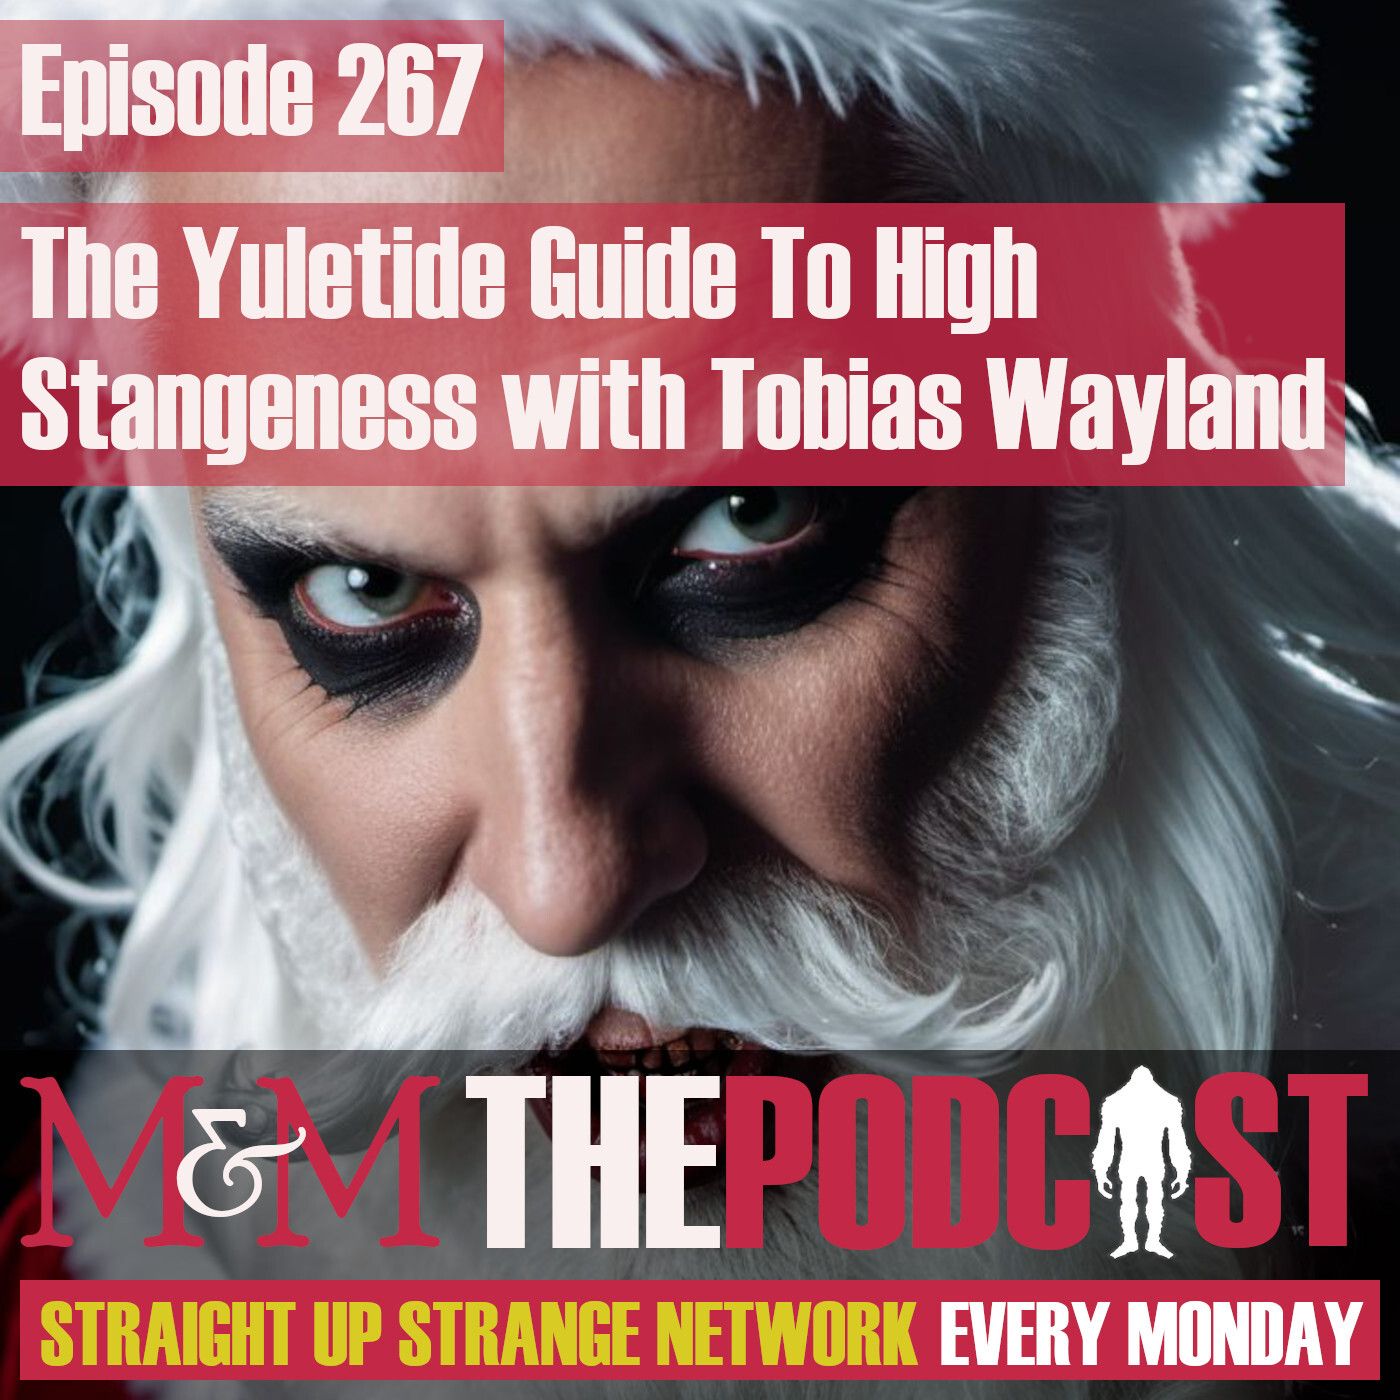 Mysteries and Monsters: Episode 267 The Yuletide Guide to High Strangeness with Tobias Wayland